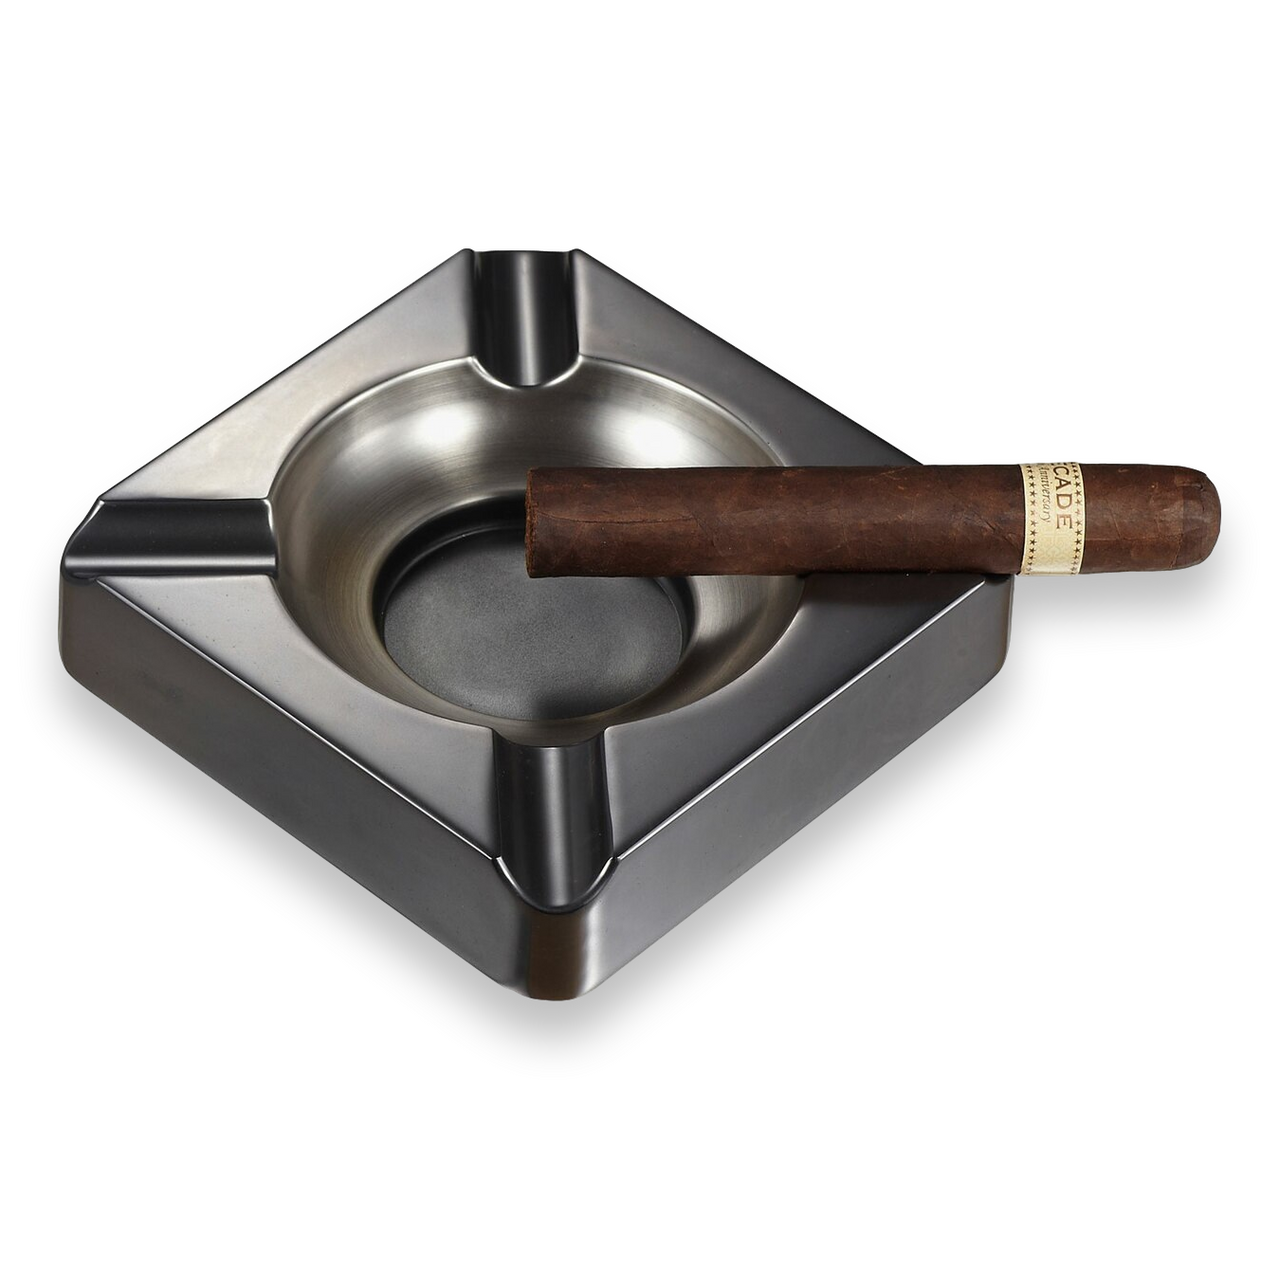 https://cdn11.bigcommerce.com/s-c63ufk/images/stencil/1280x1280/products/1529/7724/Visol-Heavyweight-Metal-4-Cigar-Ashtray-Gunmetal-VASH409-Exterior-Front-with-Cigar-1_clipped_rev_1__96124.1616252702.png?c=2?imbypass=on